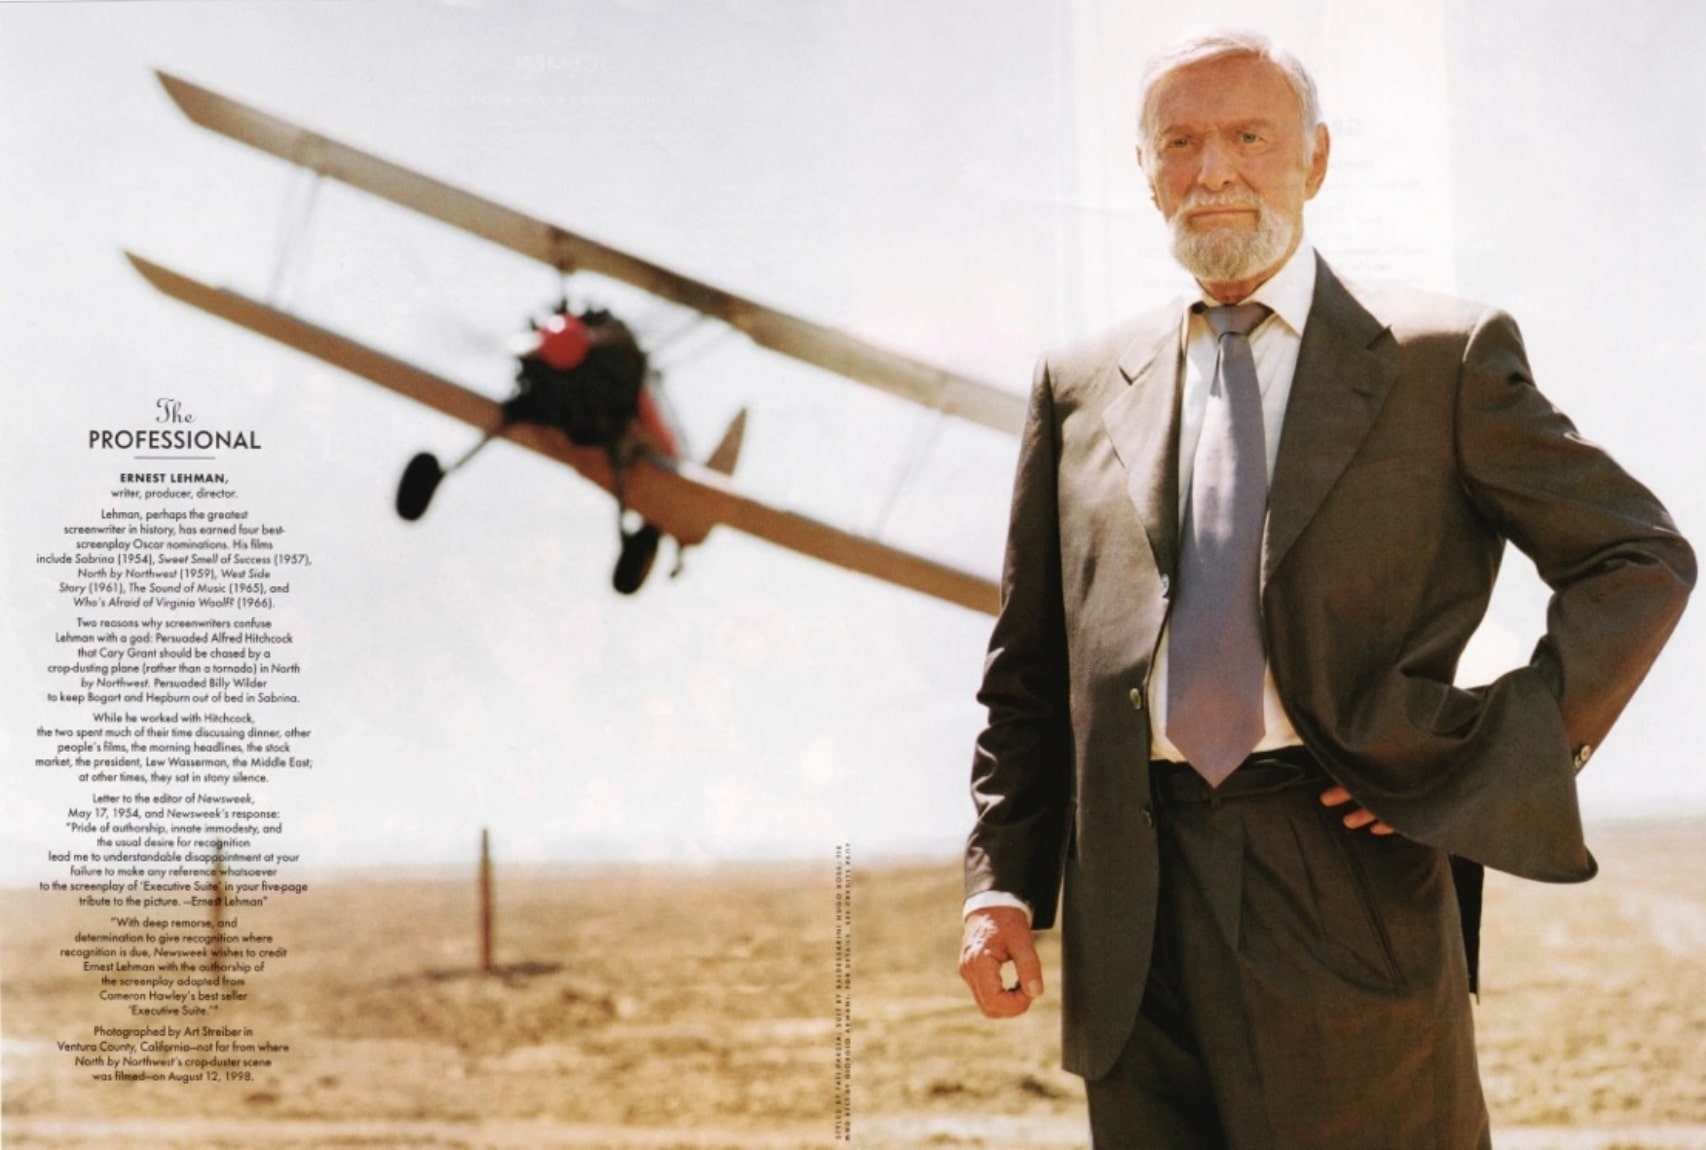 Art Streiber remade the crop dusting scene with Ernest Lehman for Vanity Fair in 1998